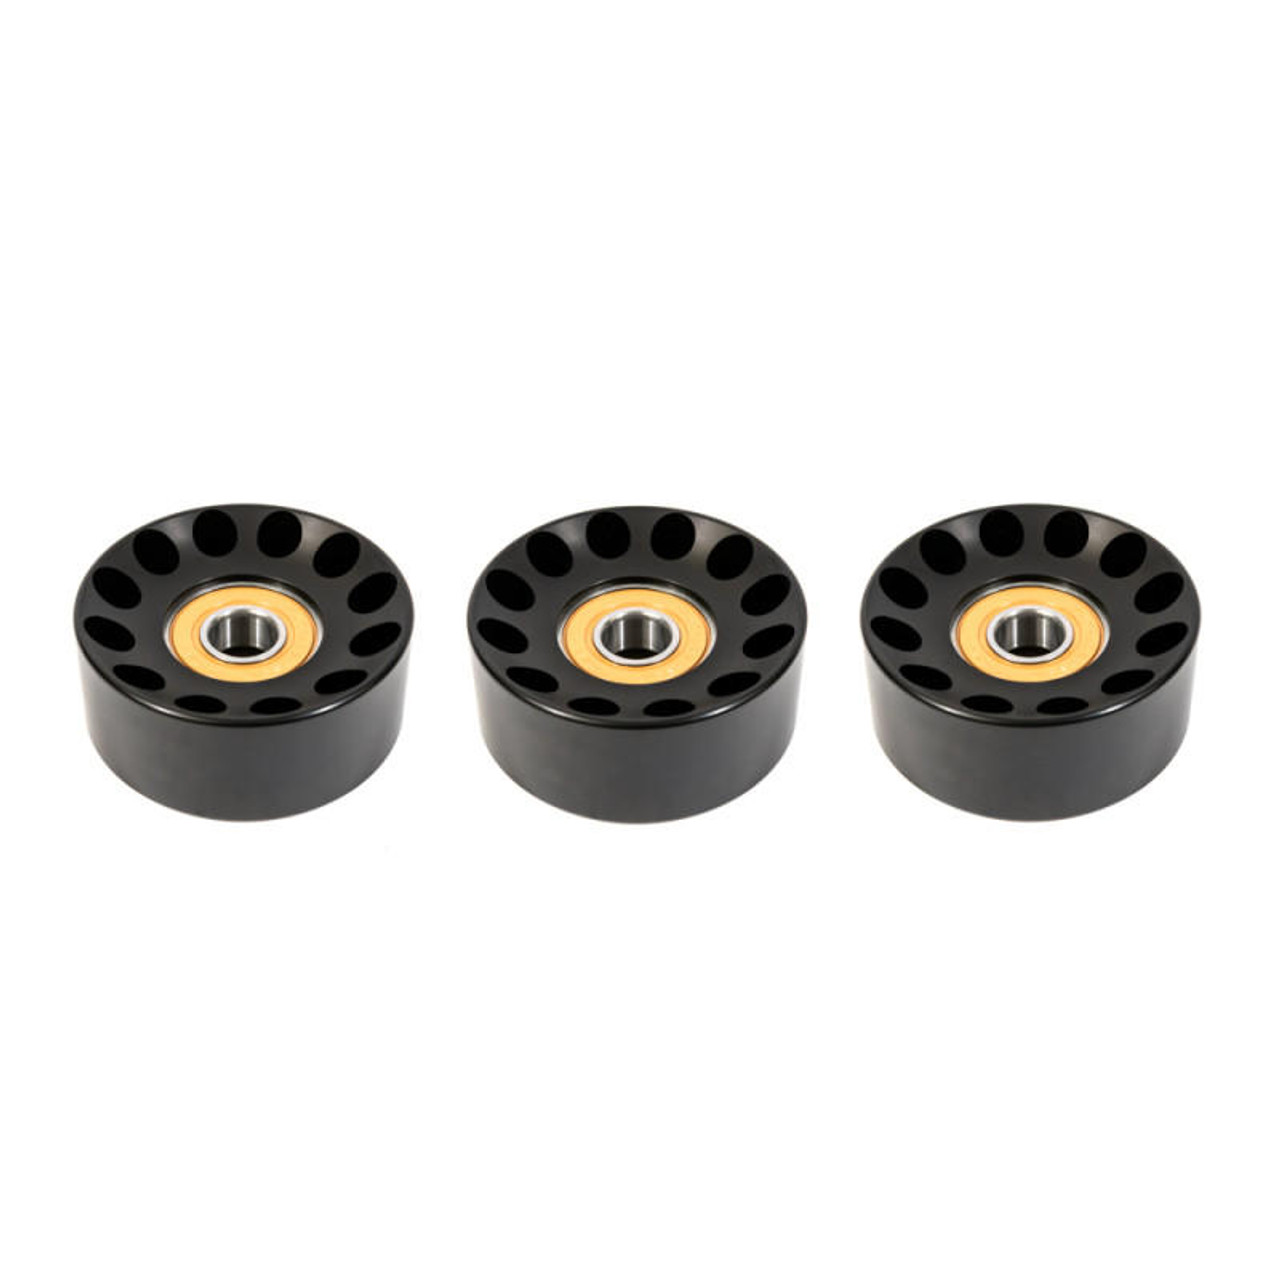  VMP Performance 03-04 Ford Mustang Cobra 4.6L 3-piece Replacement 90mm Idler Set - VMP-COBRAIDLERS 